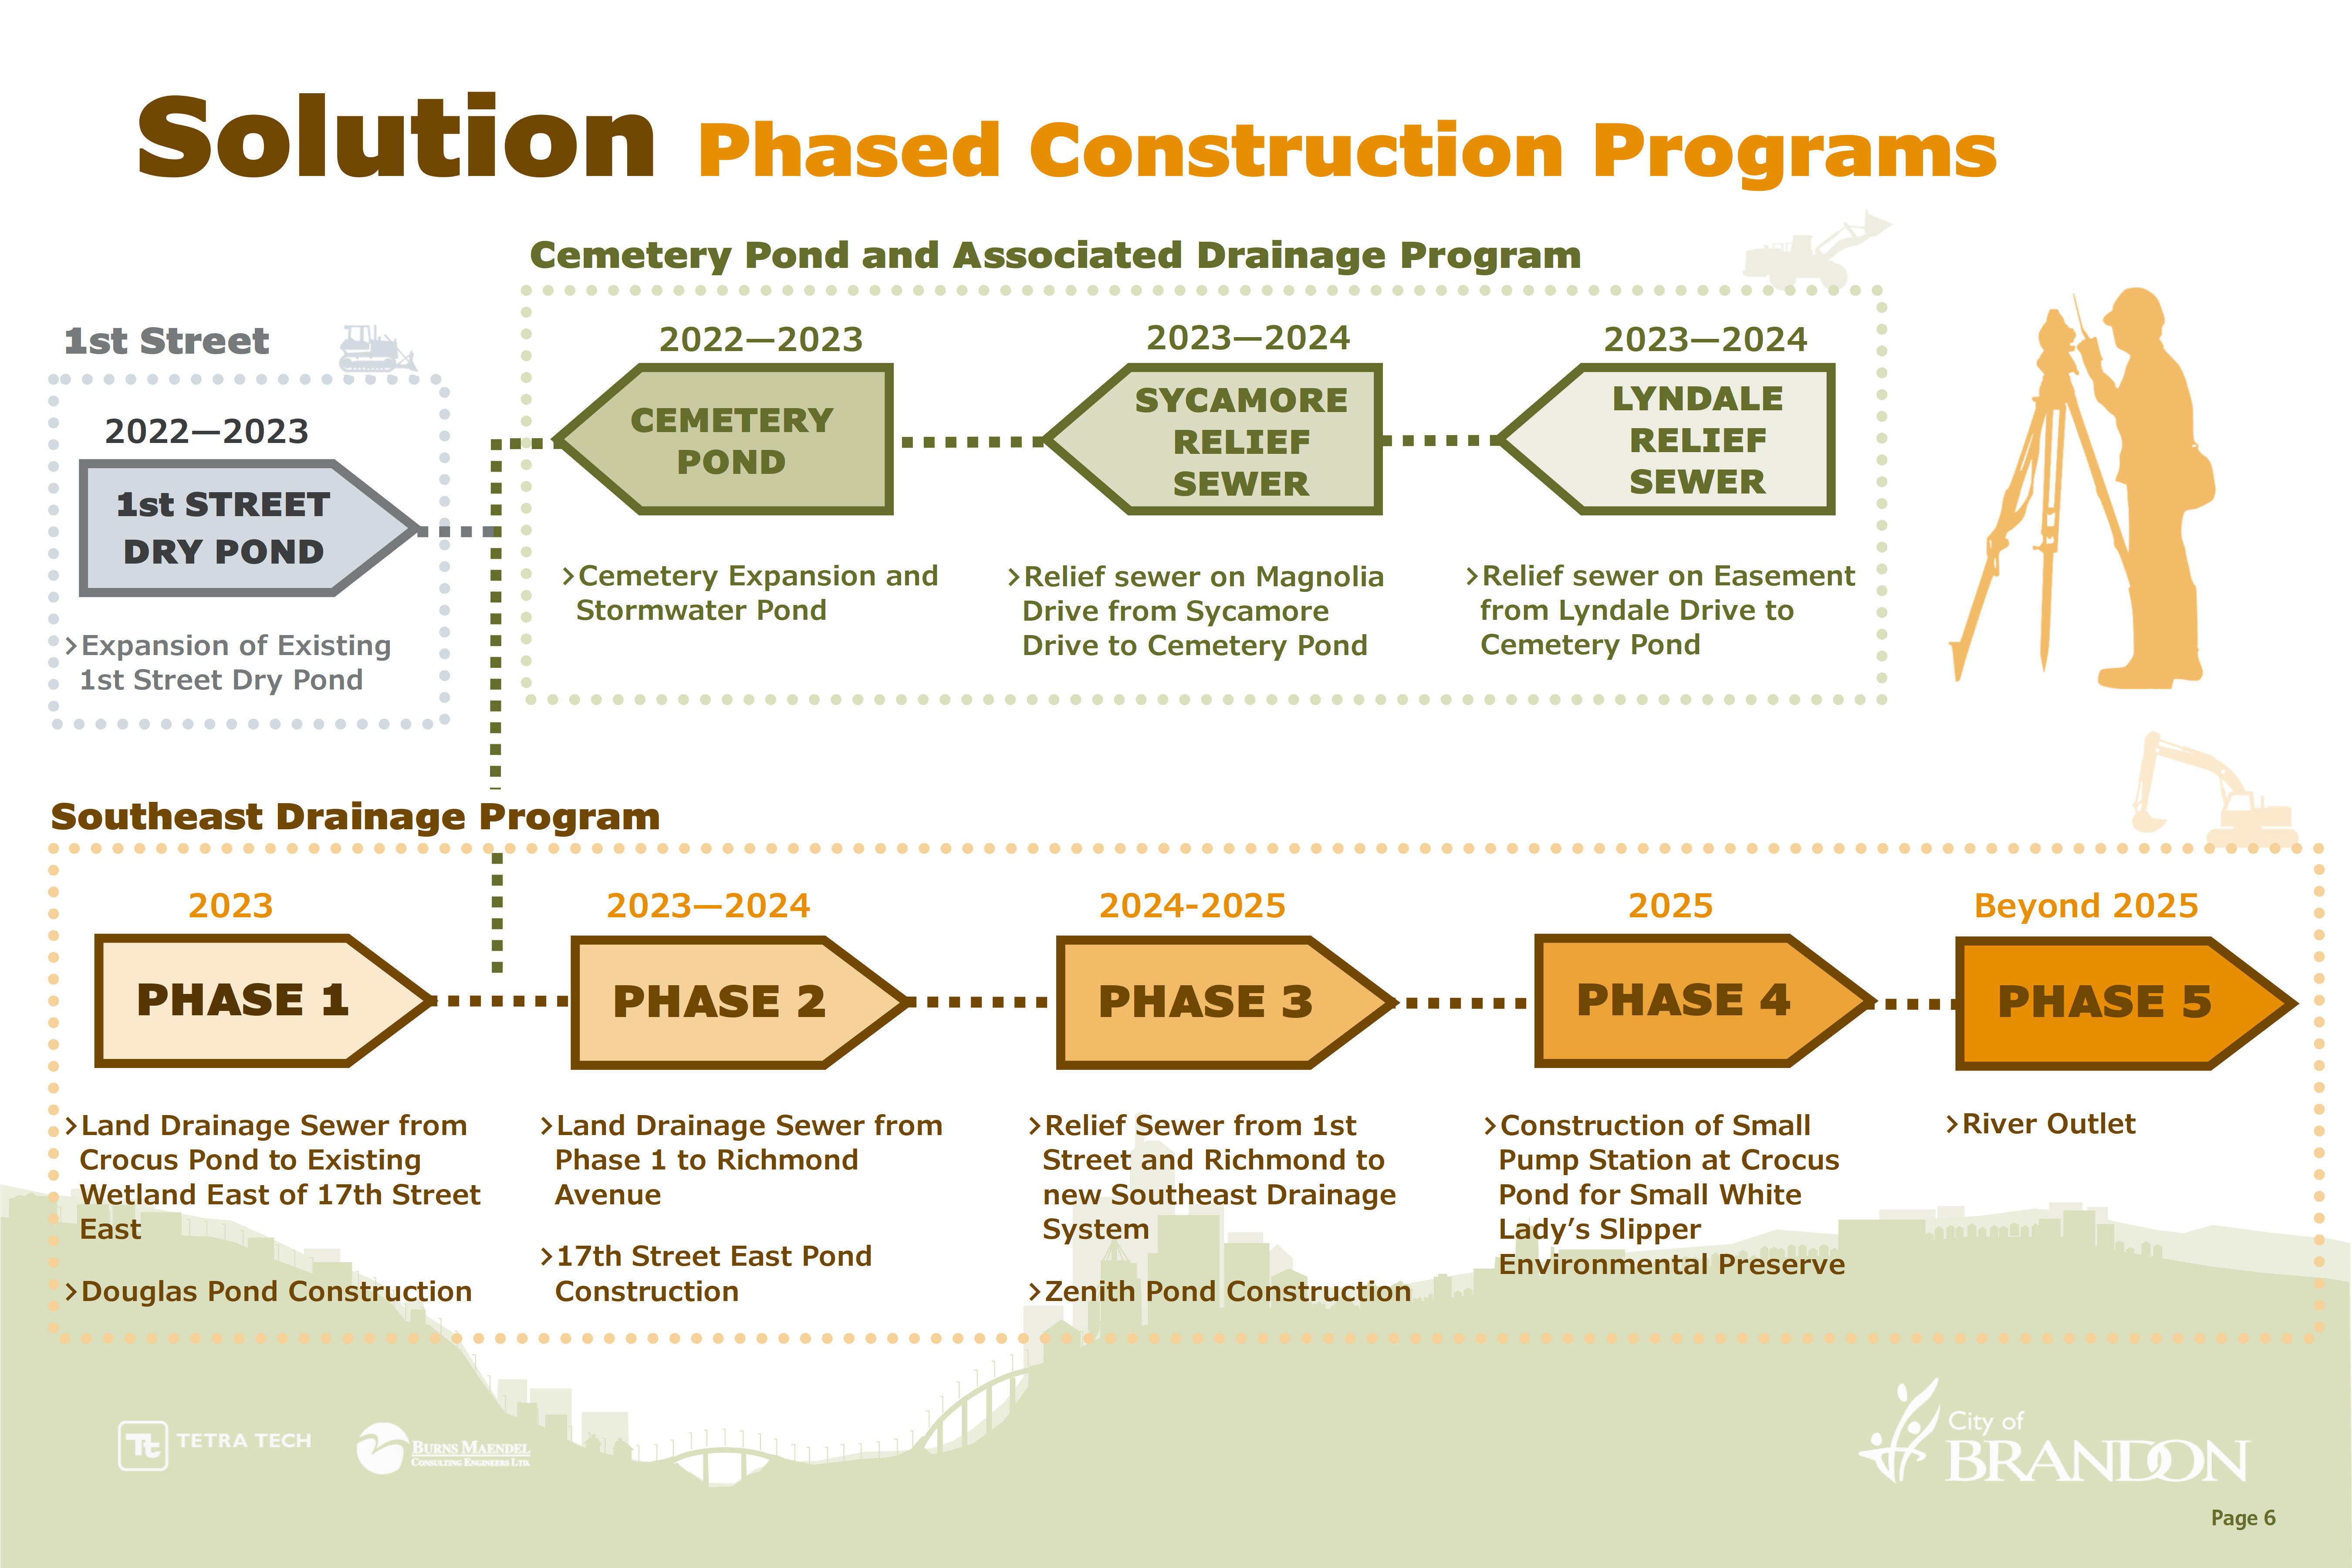 Solution - Phased Construction Programs